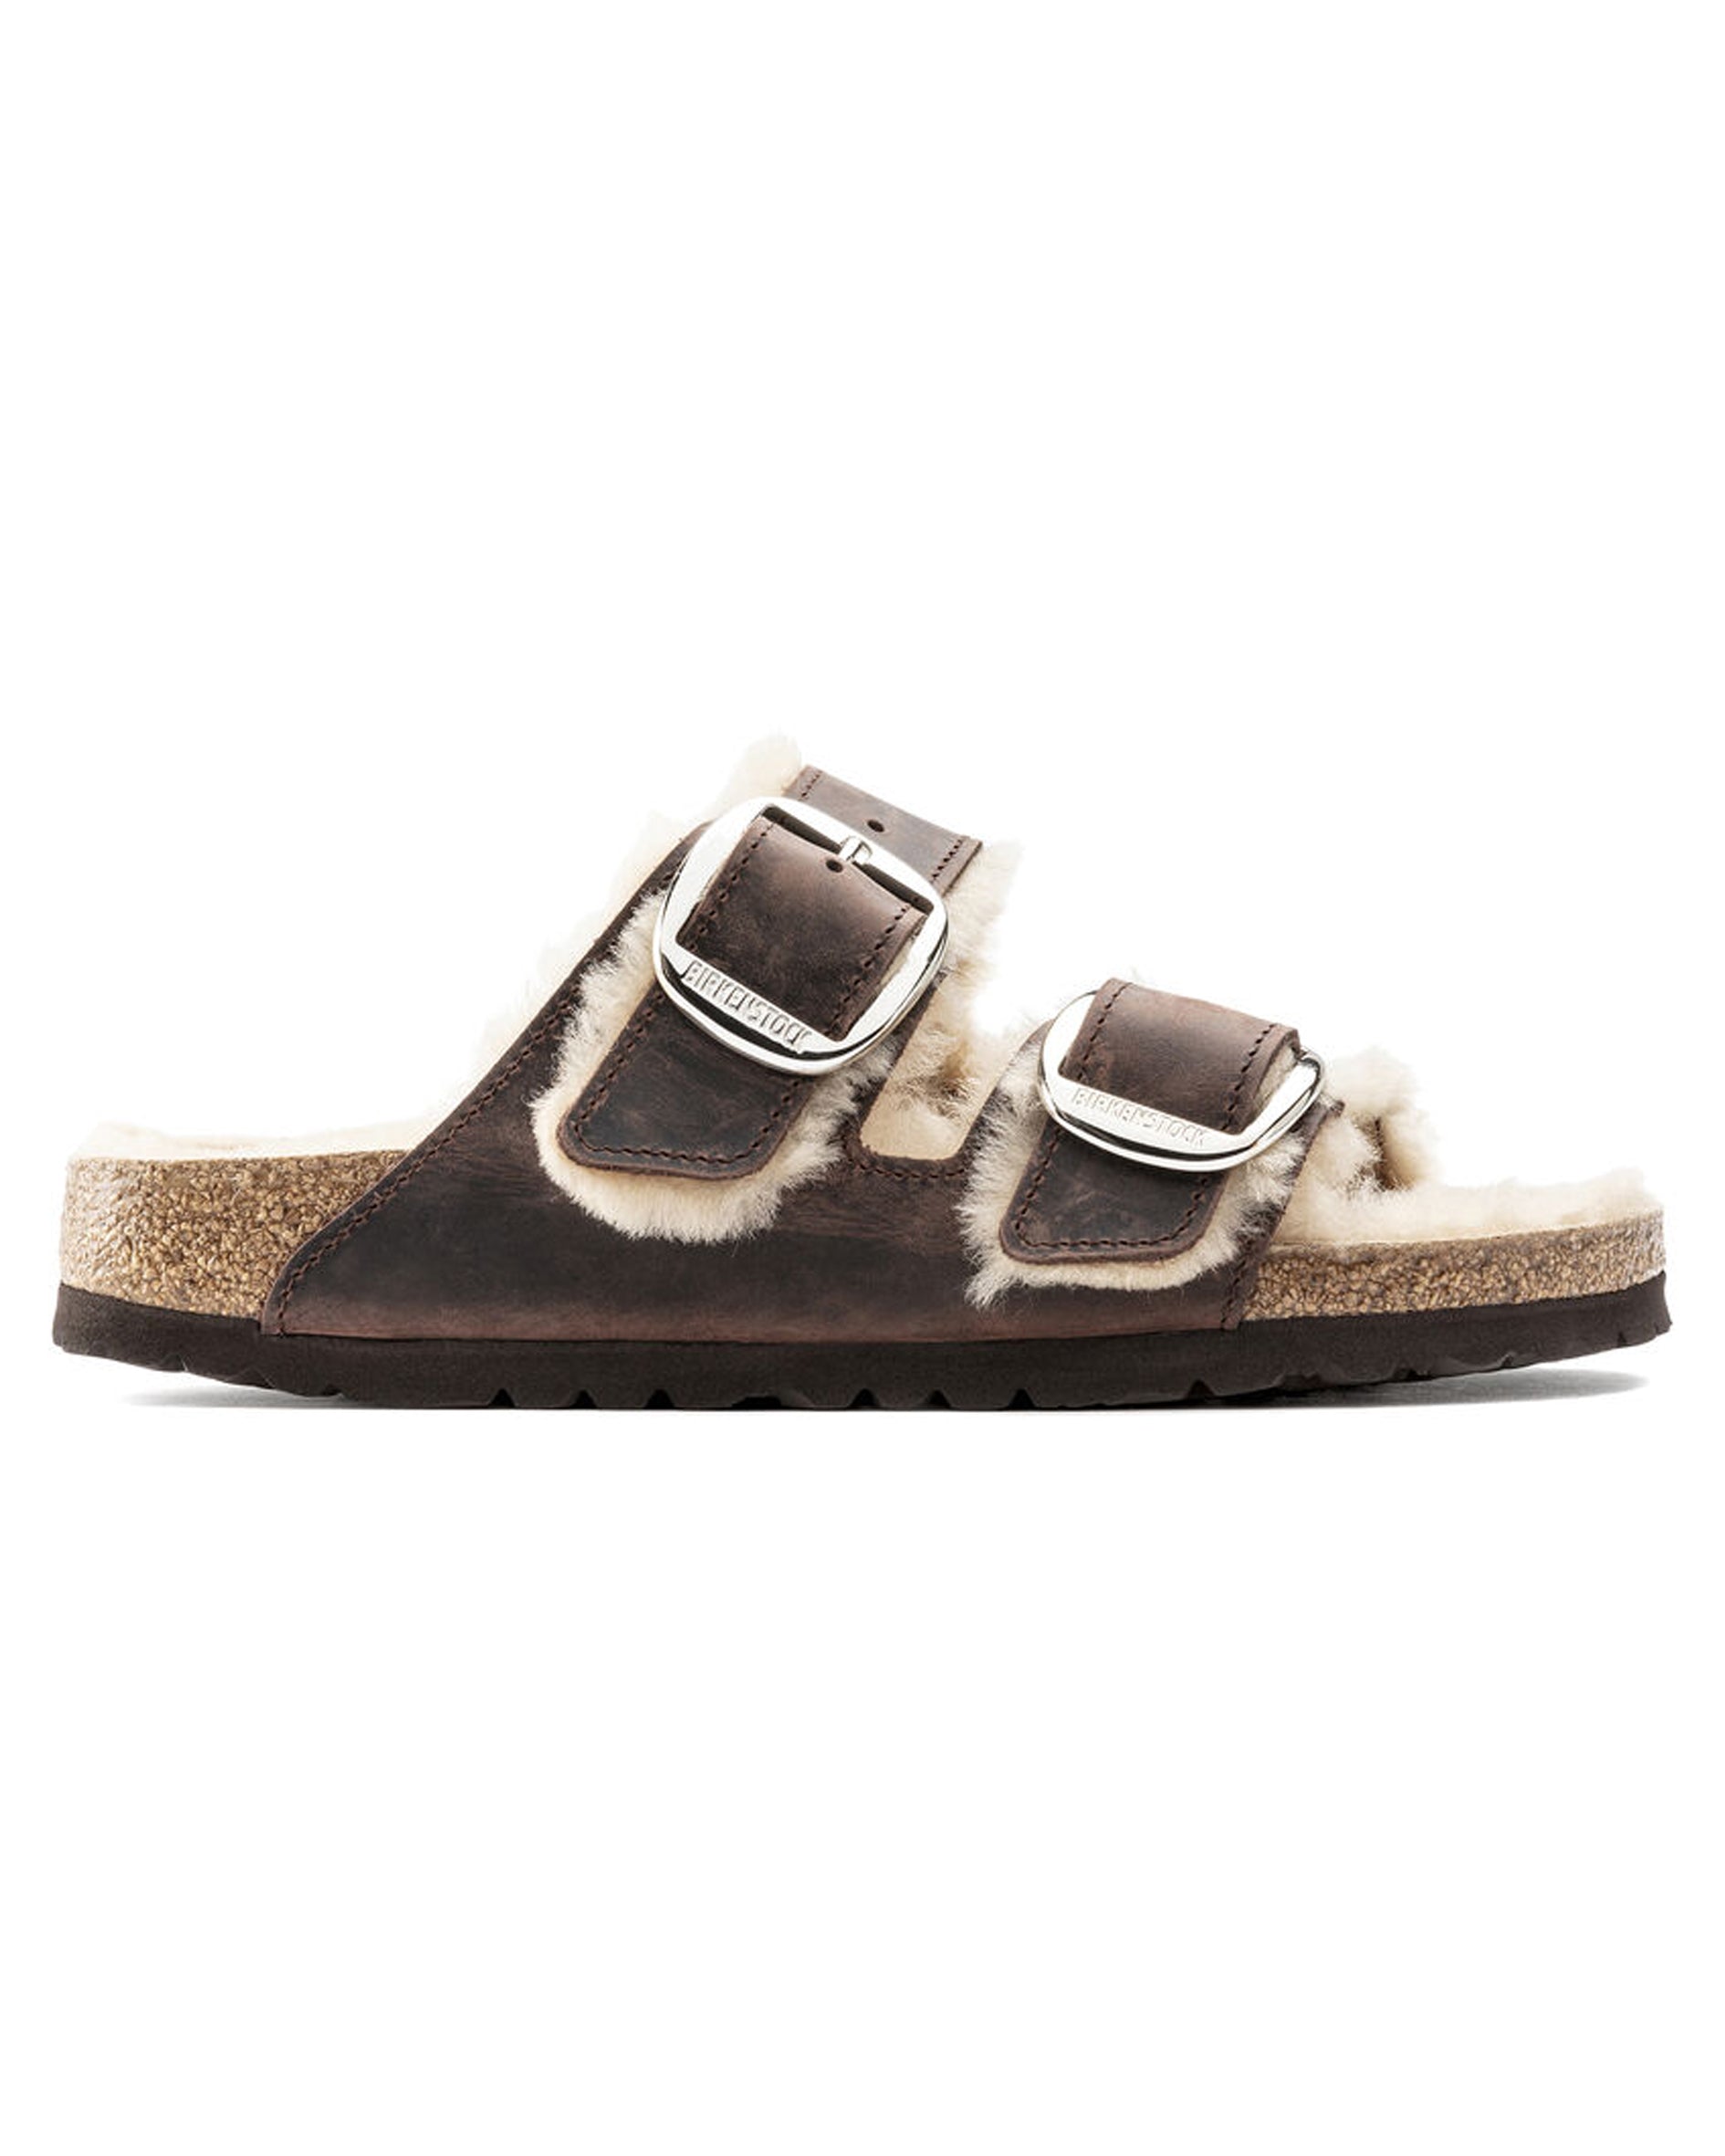 Arizona Big Buckle Shearling Brown Oiled Leather Sandals